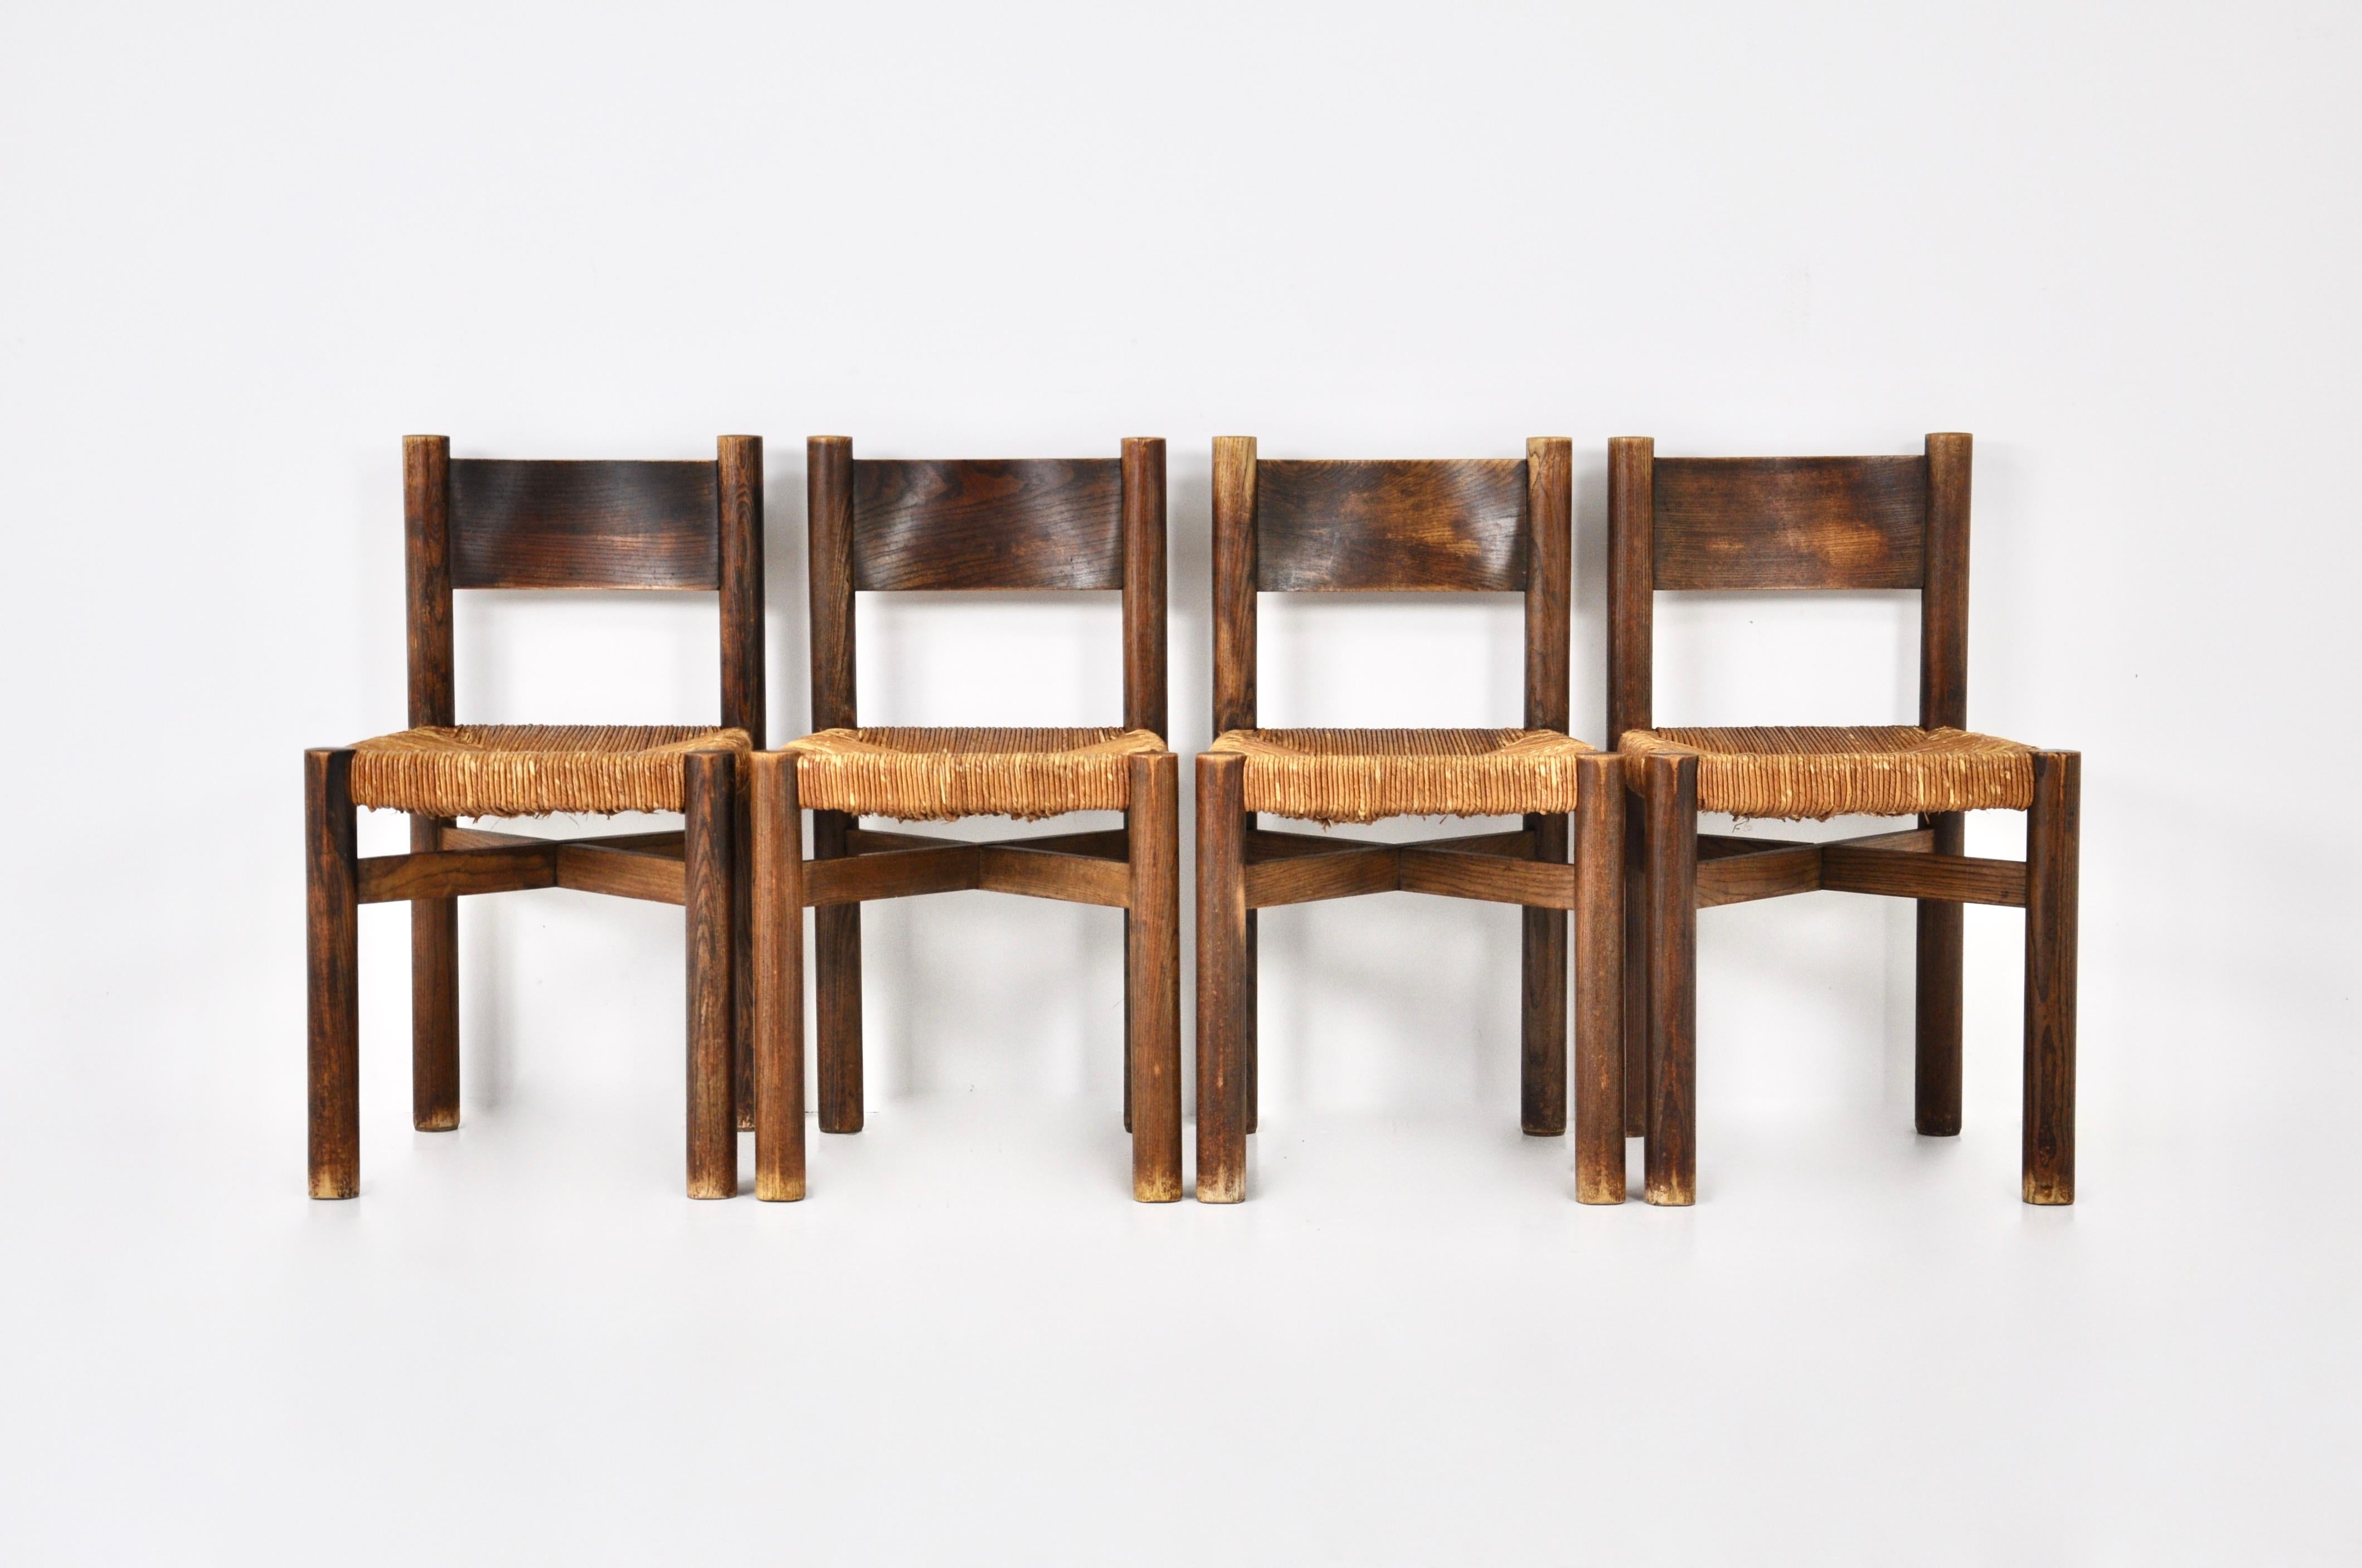 French Meribel chairs by Charlotte Perriand for Steph Simon, 1950s, set of 4 For Sale